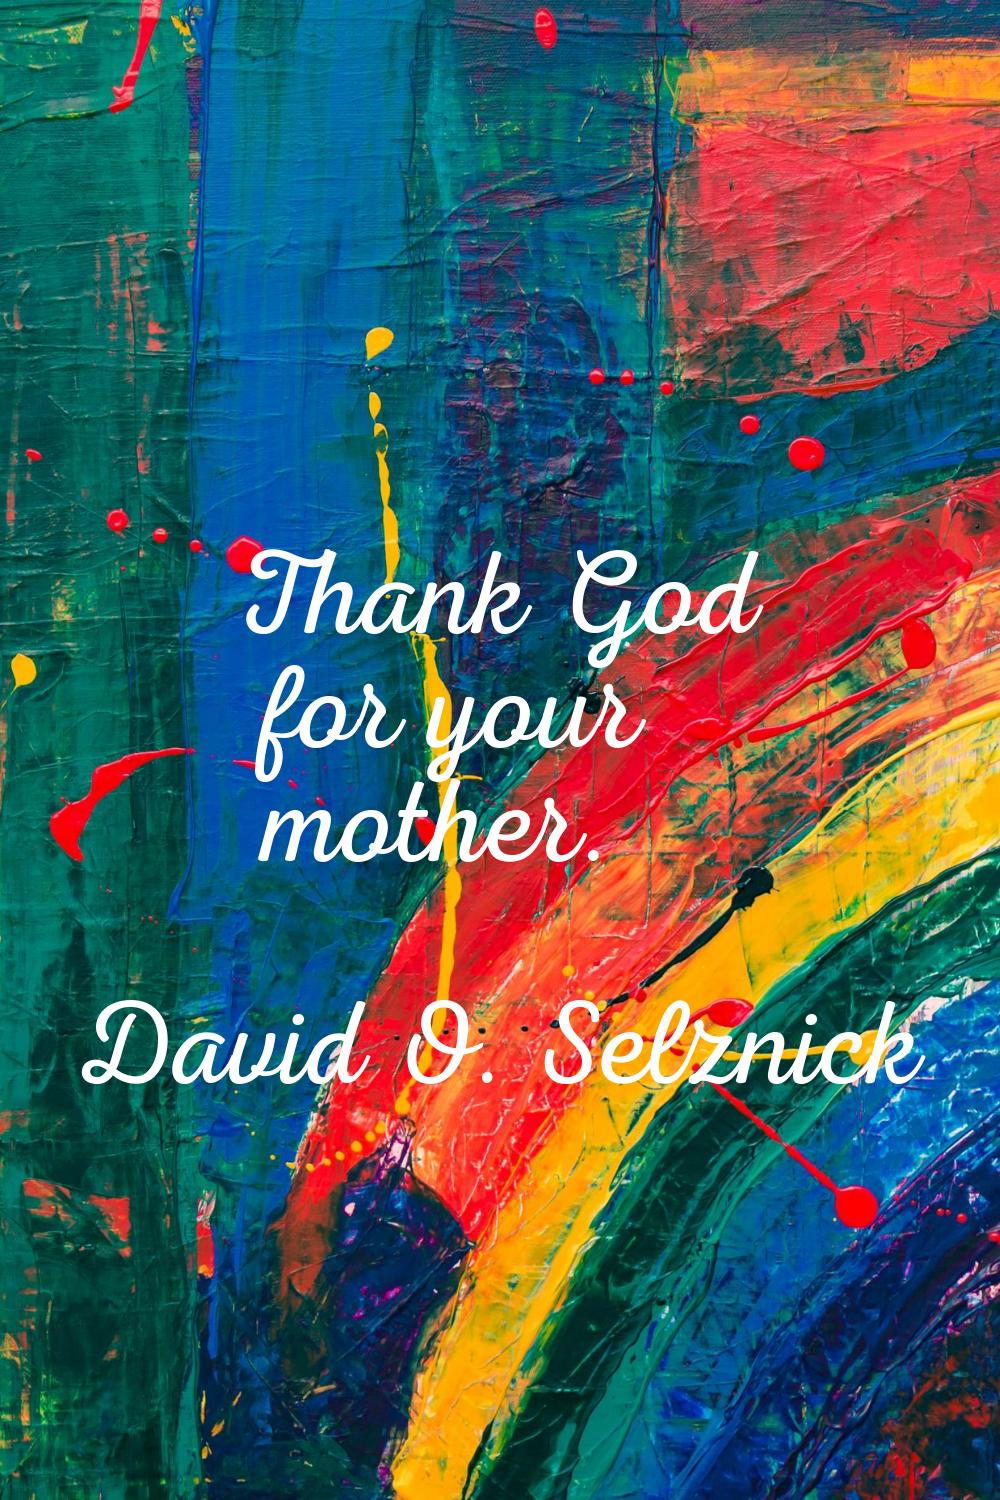 Thank God for your mother.